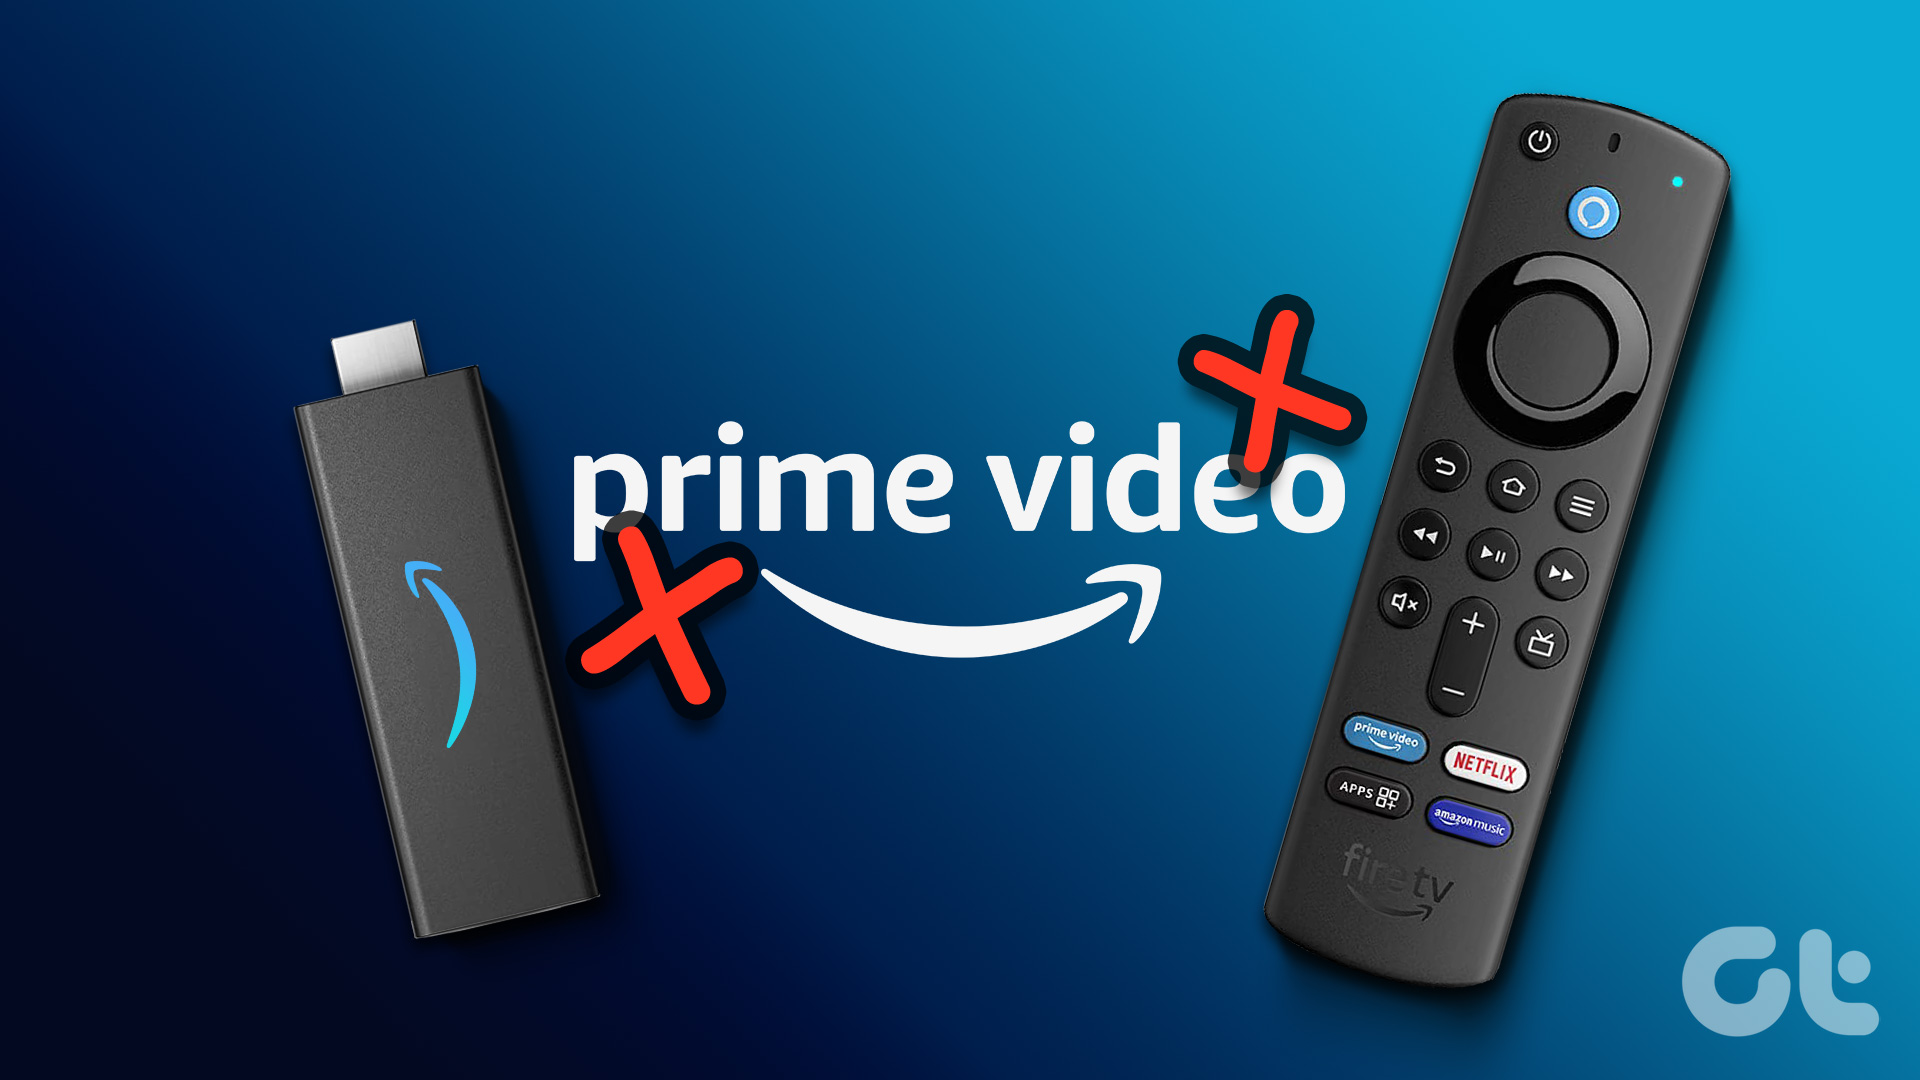 Top 7 Ways to Fix Amazon Prime Video Not Working on Fire TV Stick